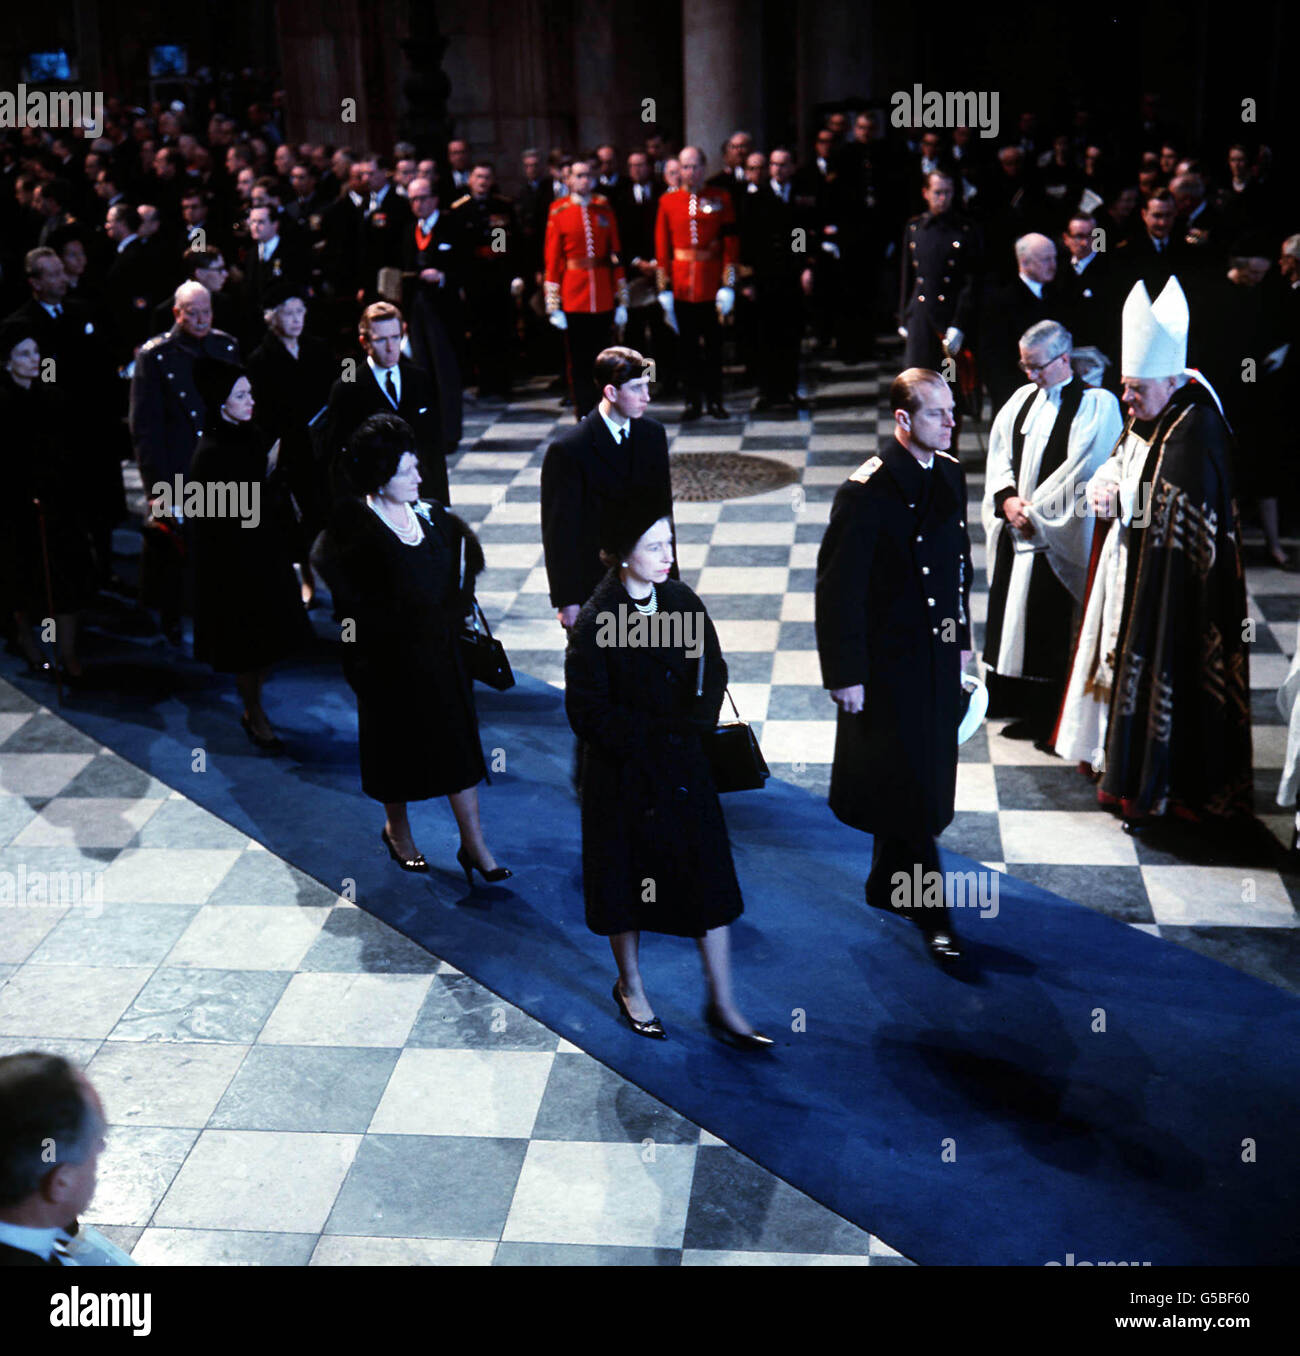 The Queen and the Duke of Edinburgh lead mourners inside St. Paul's Cathedral, London, during the funeral service for Sir Winston Churchill. Behind are the Queen Mother and Prince Charles (later the Prince of Wales). Stock Photo